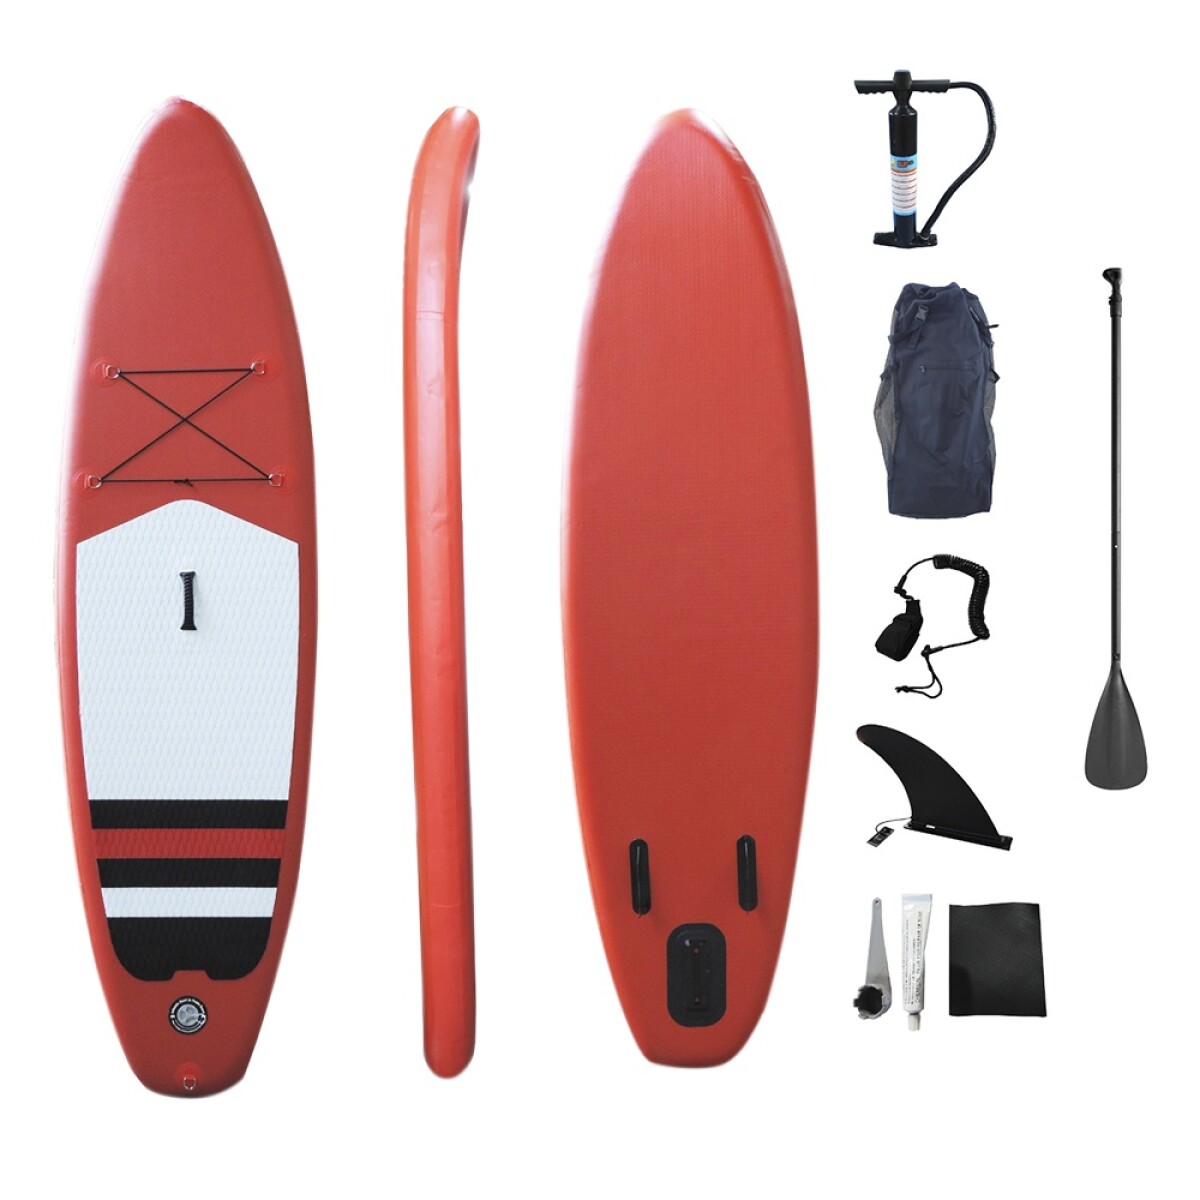 Tabla Stand Up Paddle Sup 280 + Remo + Inflador + Bolso - Rojo 